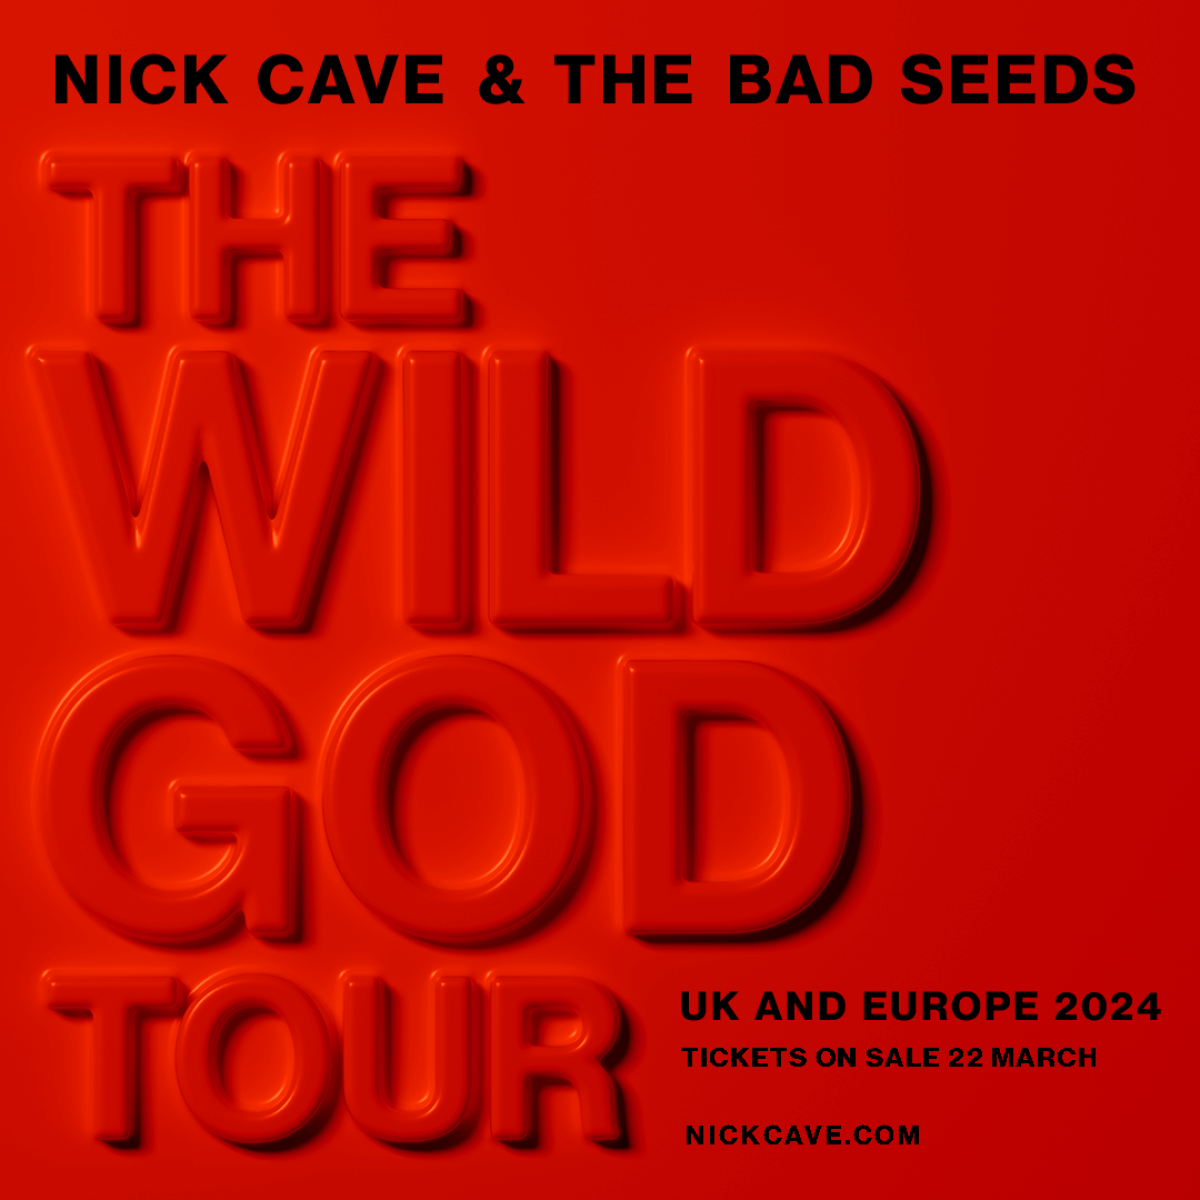 Nick Cave and the Bad Seeds - The Wild God Tour en Barclays Arena Tickets